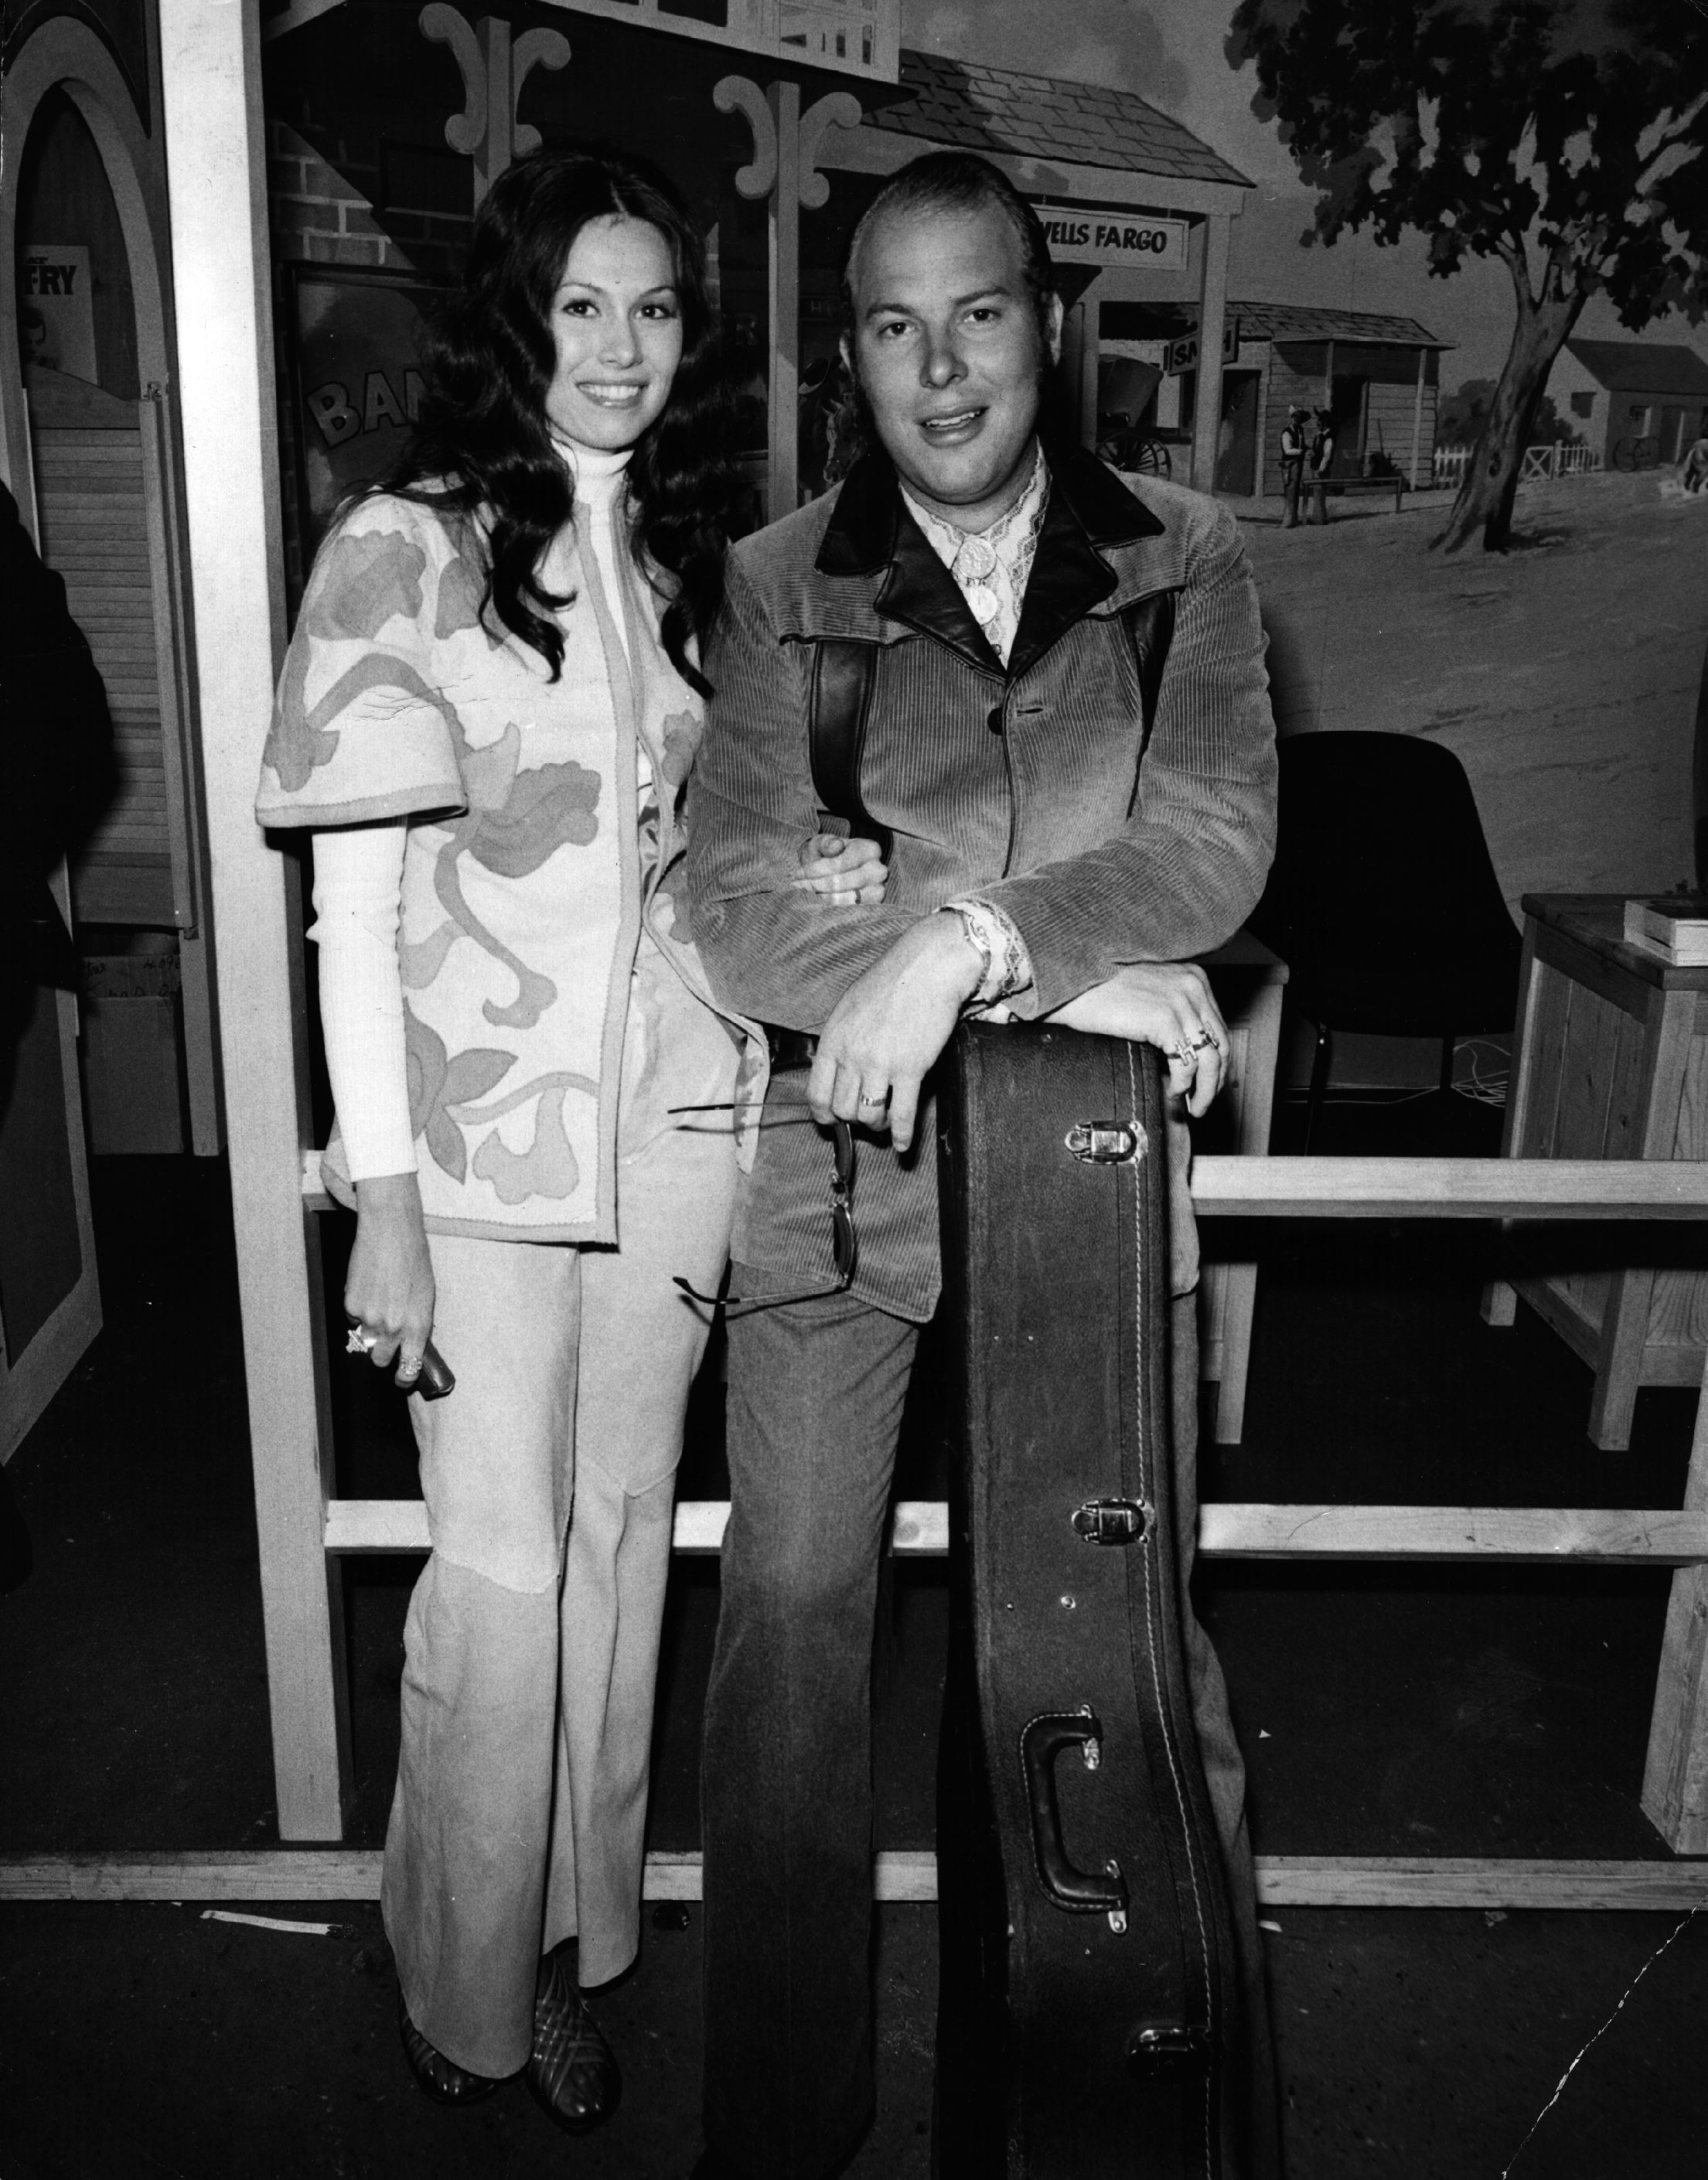 Hank Williams Jr. and Gwendolyn Sue Yeargain in London for the International Country Music Festival on April 12, 1972 | Source: Getty Images